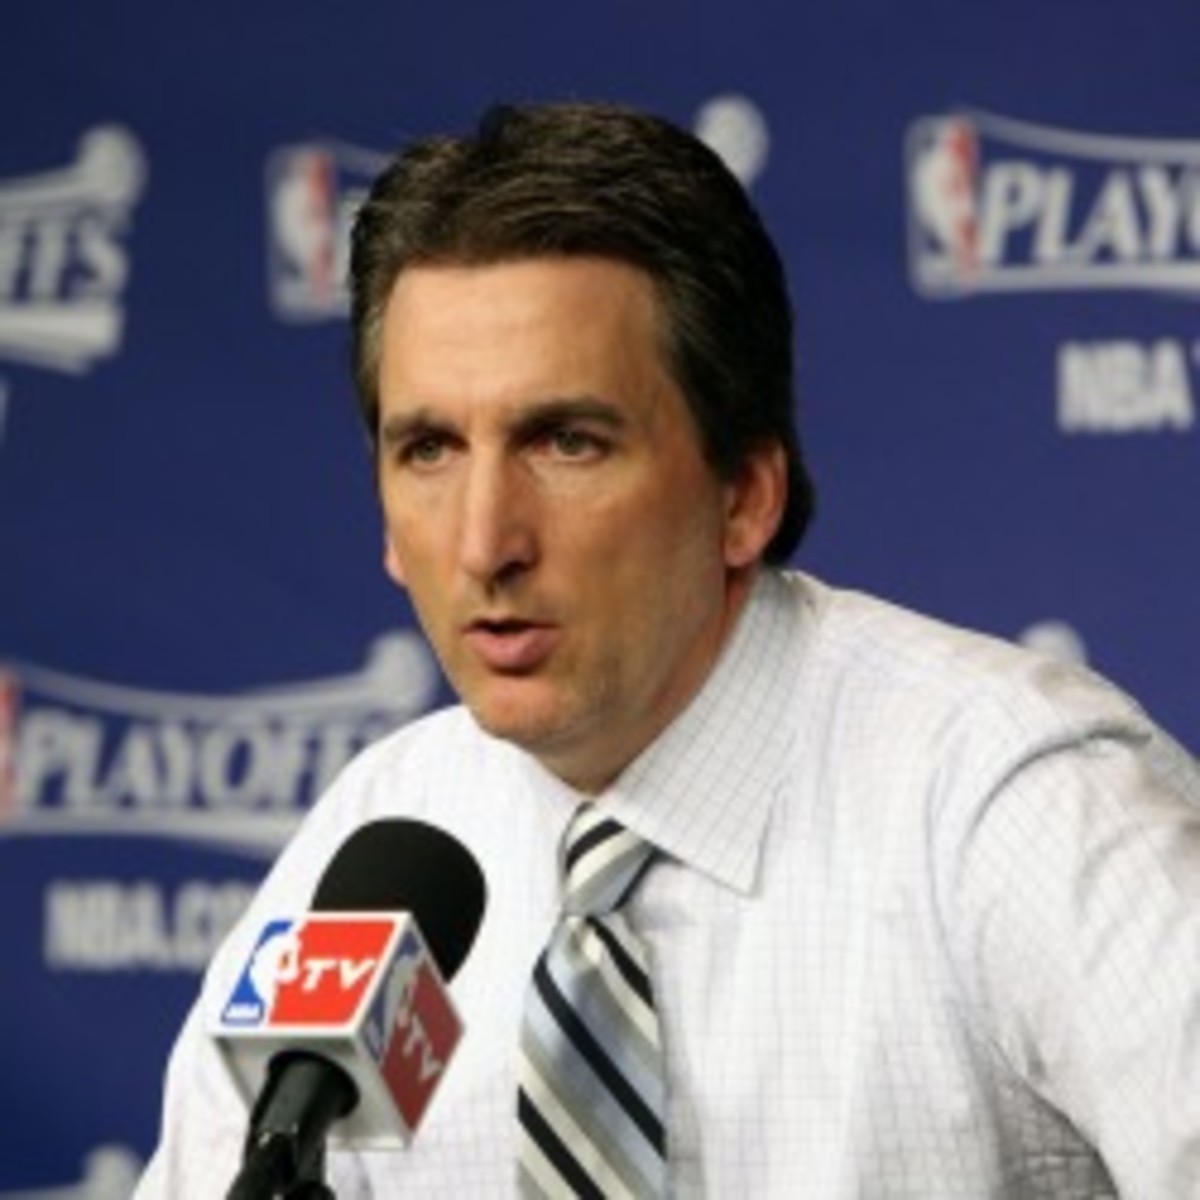 Clippers coach Vinny Del Negro will reportedly meet with ownership about his future. (Getty Images)